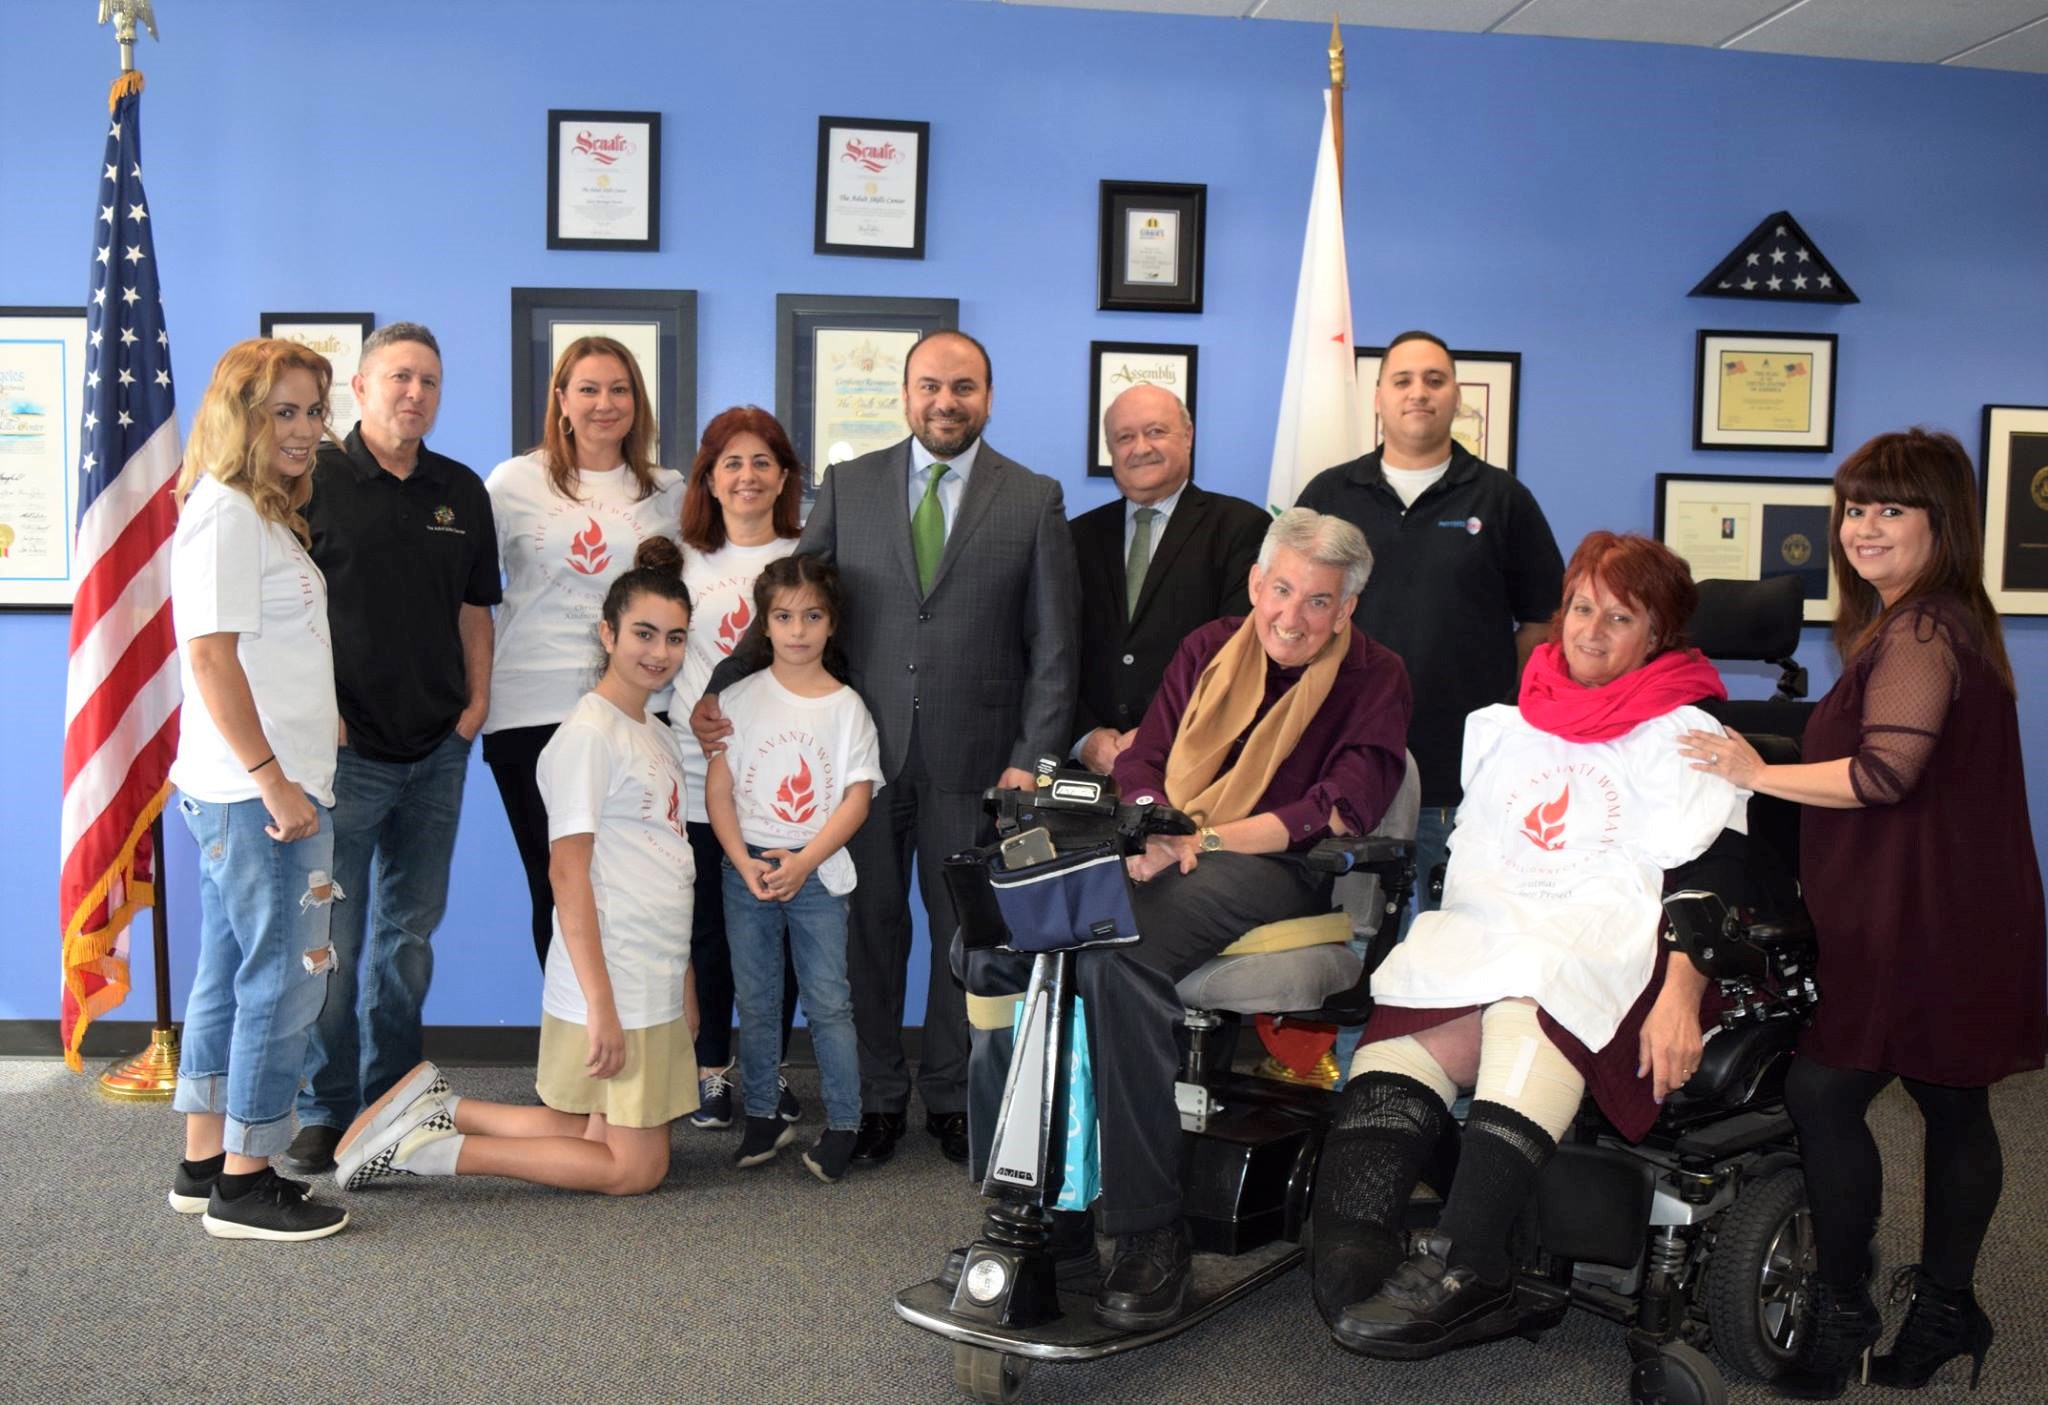 Ken with Assemblyman Nazarian with TASC recipient of a community award of a new recliner and adjustable bed